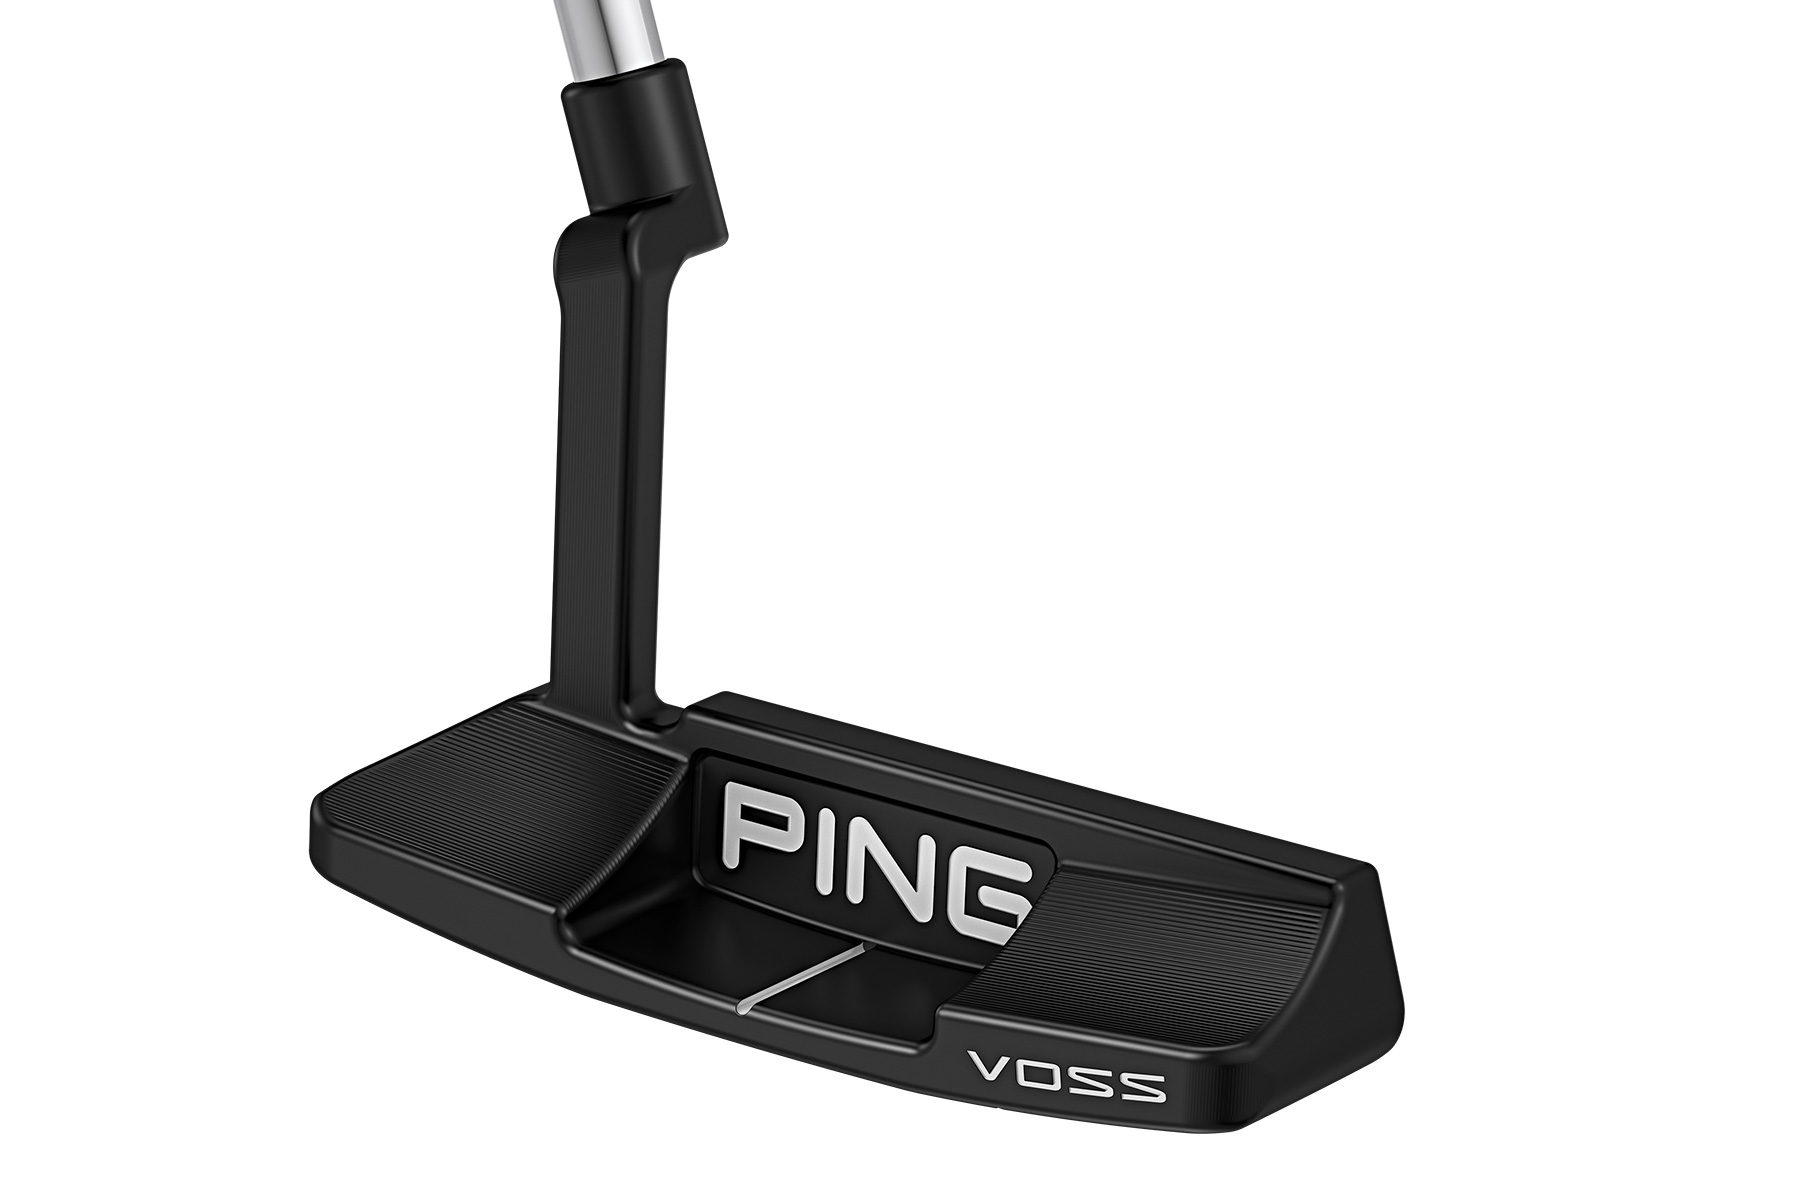 PING Vault 2.0 Voss Stealth Putter from american golf